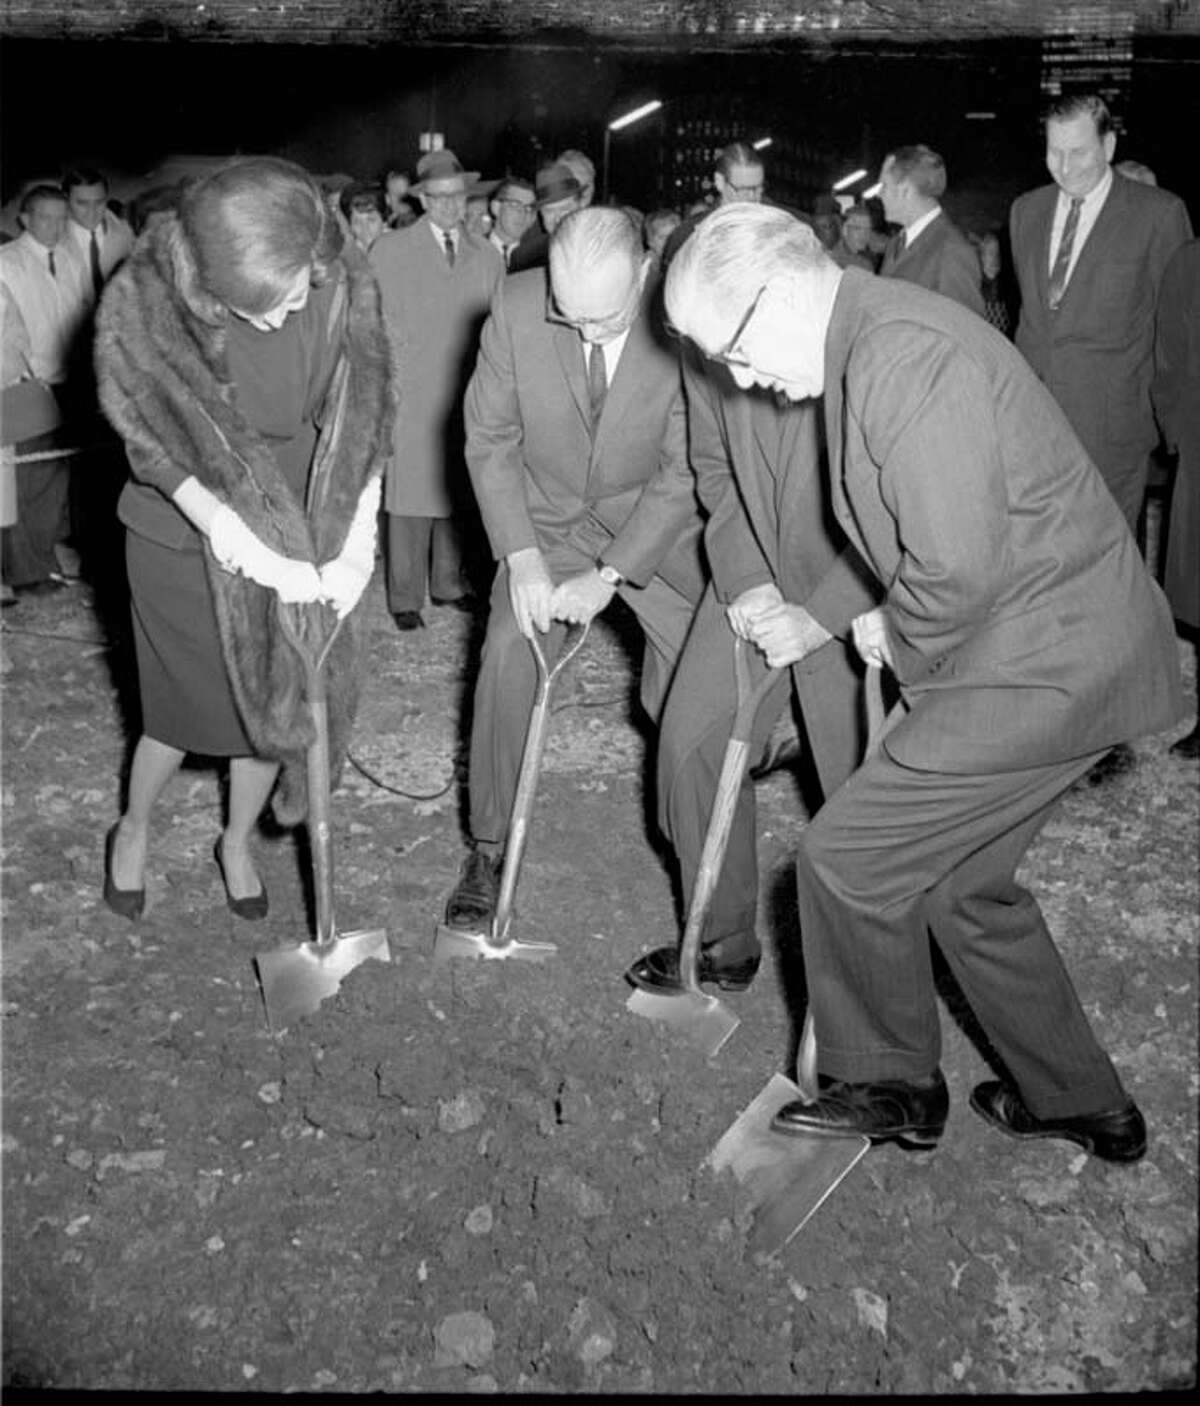 Construction broke ground in 1964 on the Jones Hall for the Performing Arts. Here some local officials celebrate the groundbreaking ceremony. 